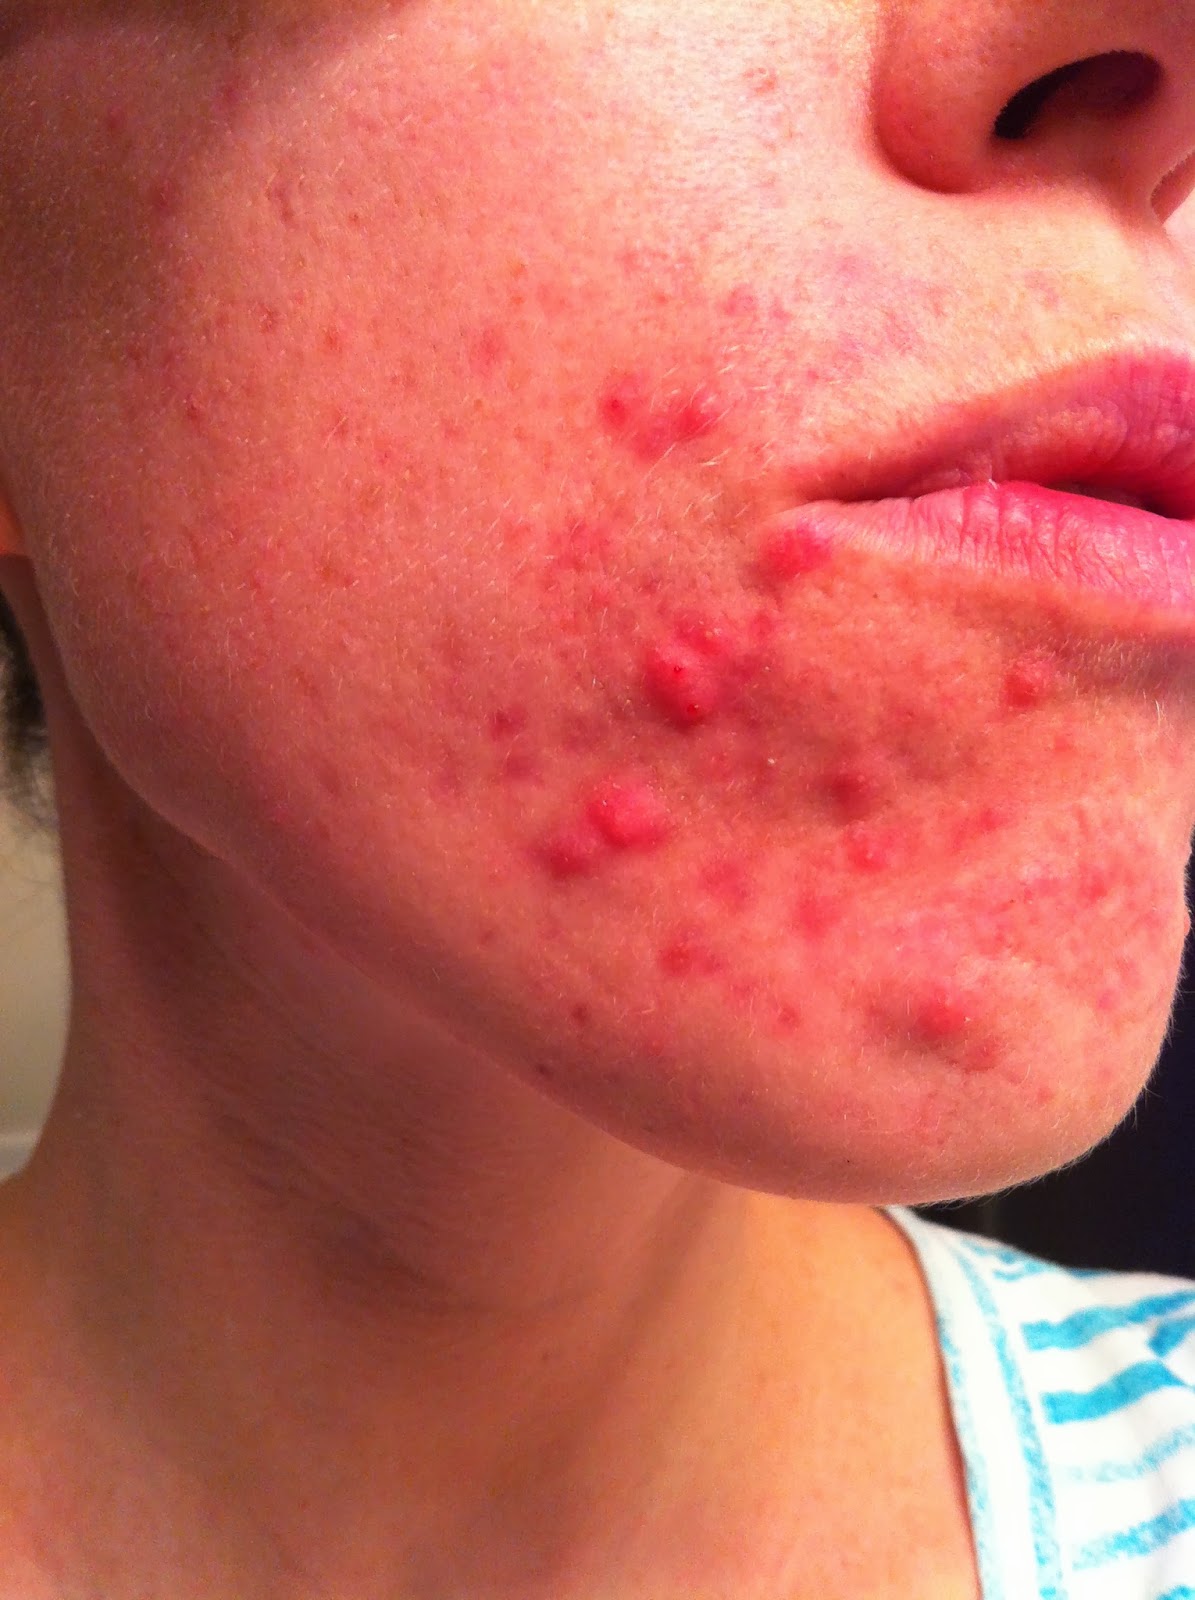 Acne or Rosacea? A Case of Mistaken Identity | Rosacea.org